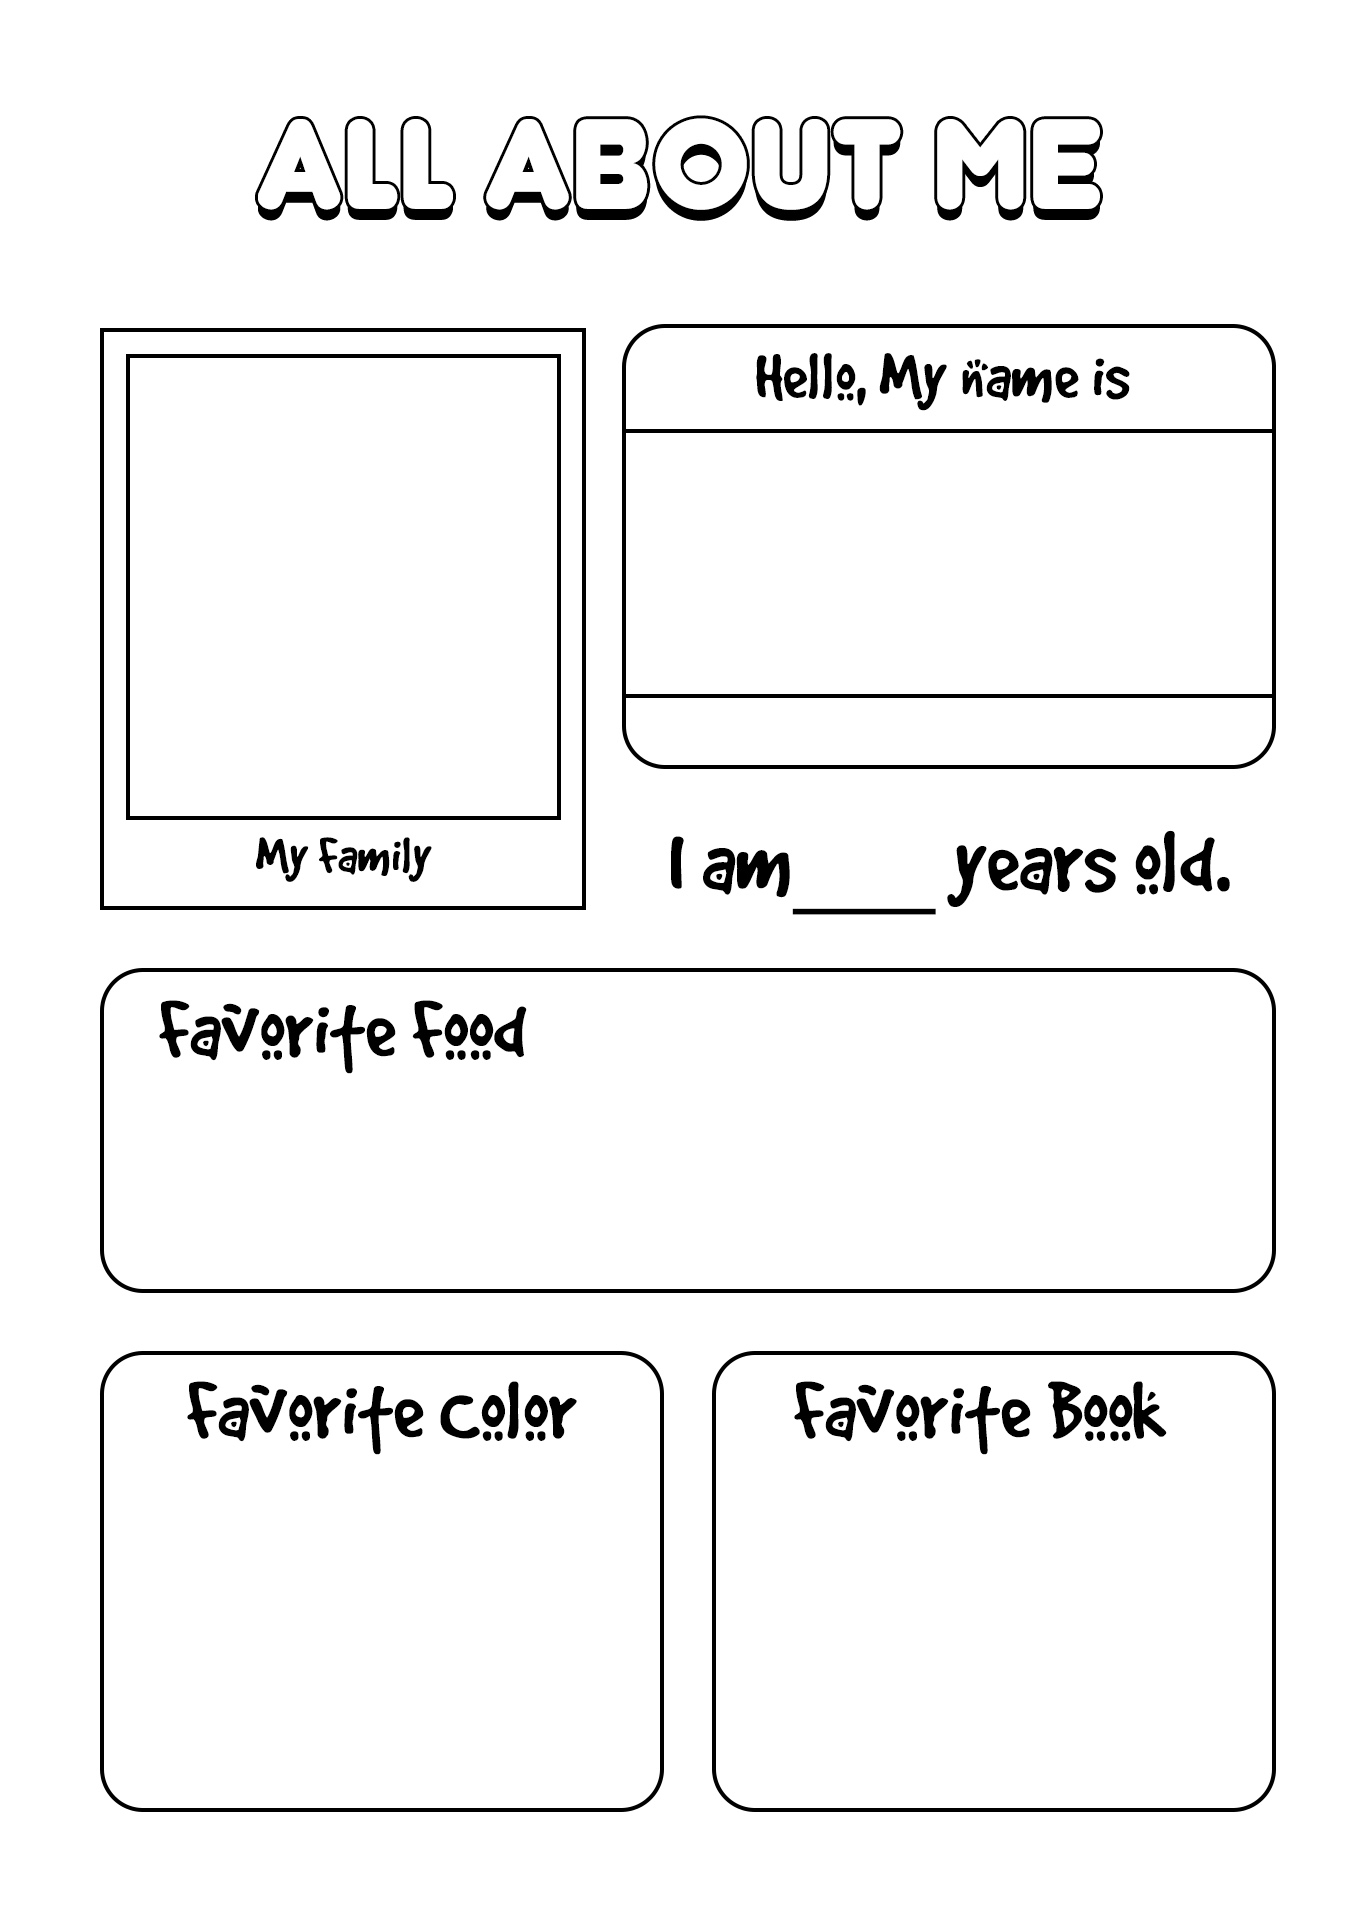 All About Me Printables Image